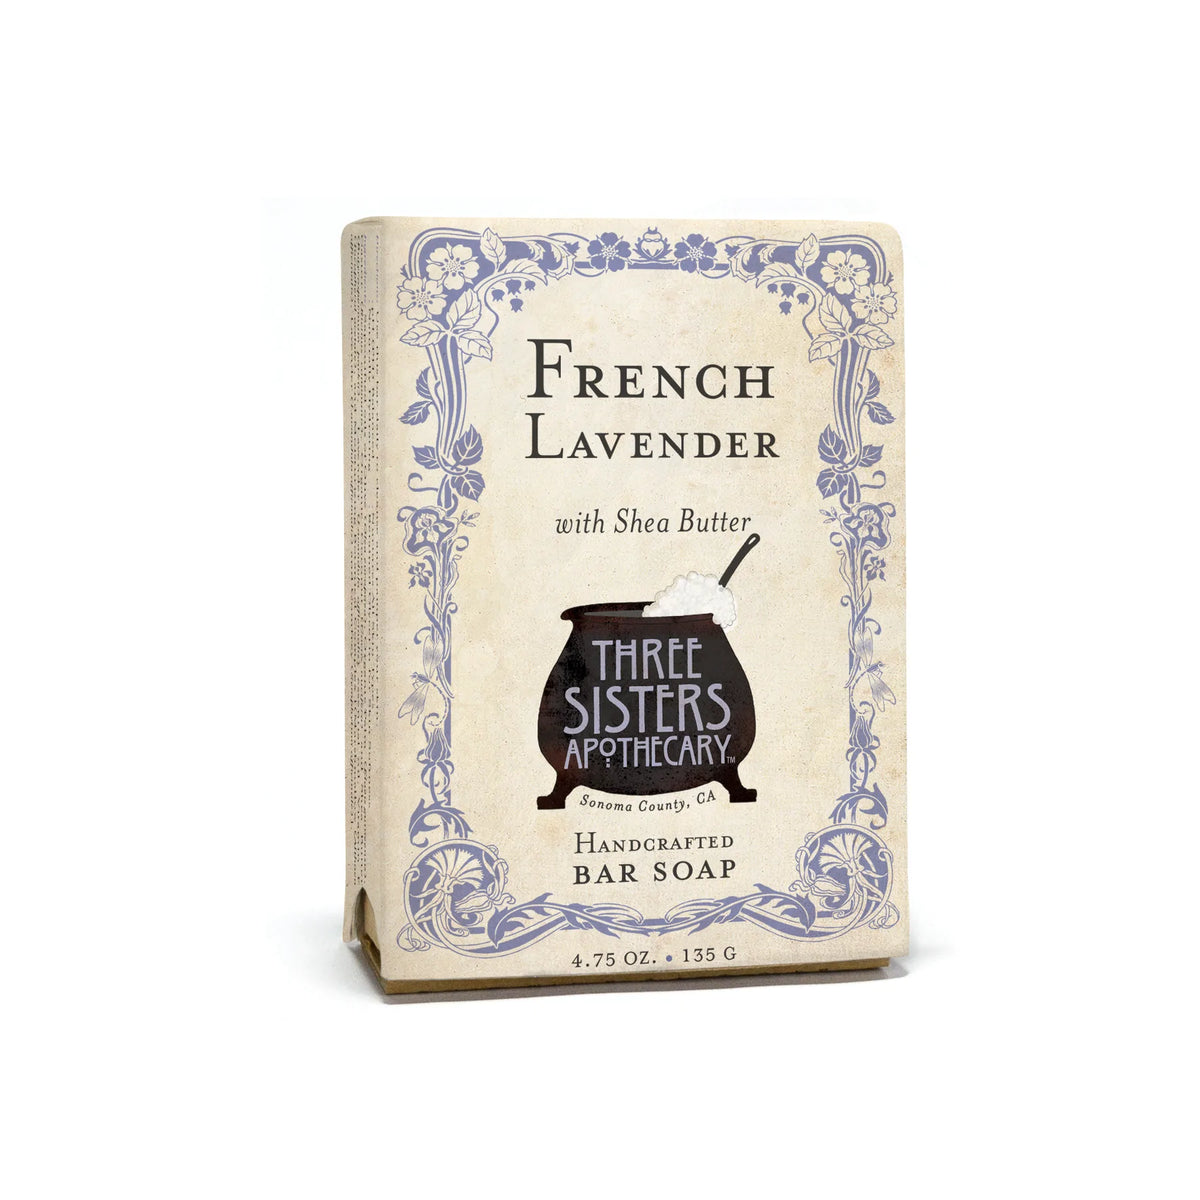 Three Sisters Apothecary French Lavender Bar Soap